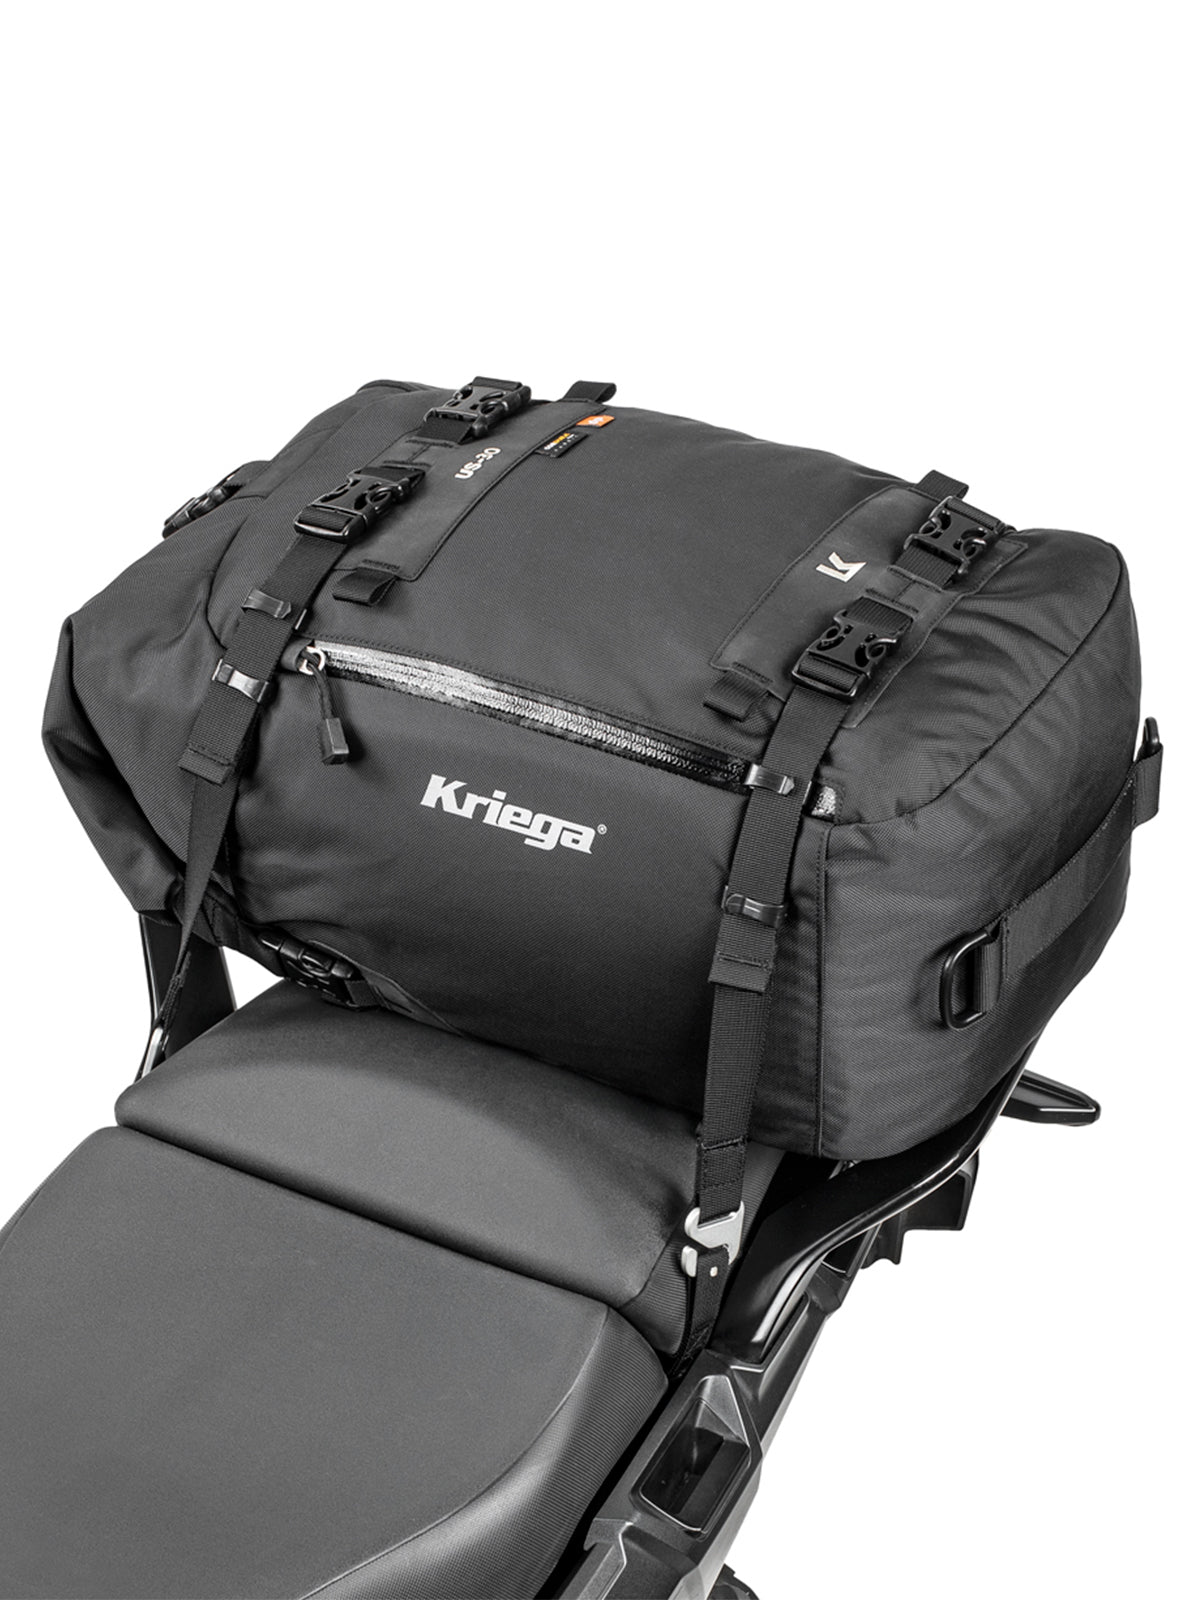 Kriega US30 Drypack attached to rear of motorbike